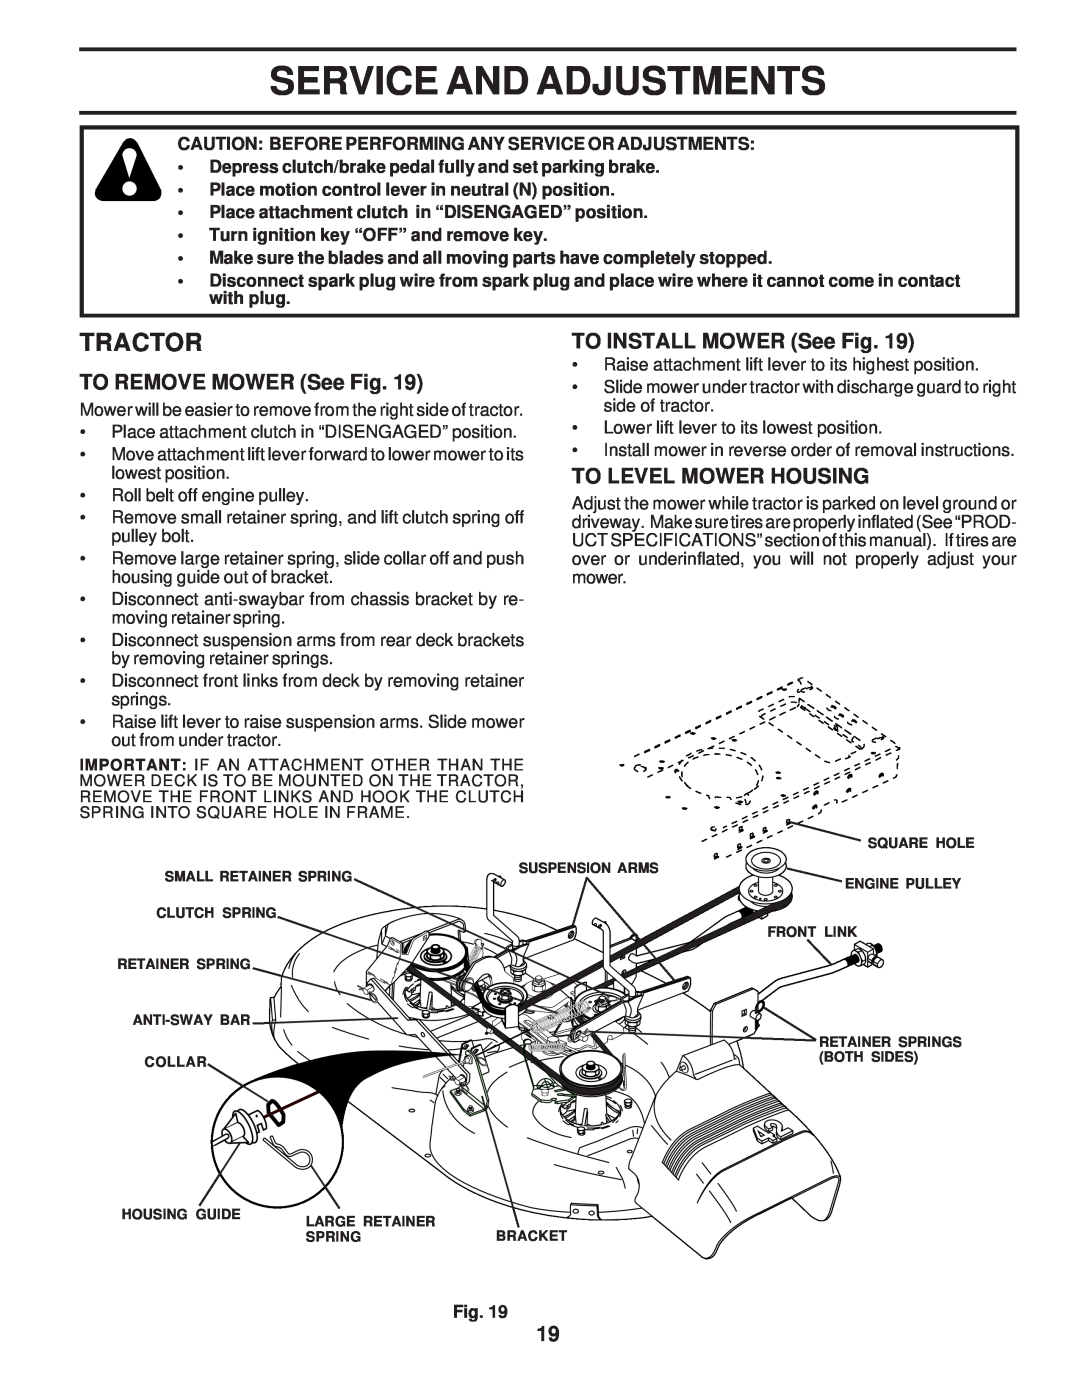 Poulan 173284 Service And Adjustments, TO REMOVE MOWER See Fig, TO INSTALL MOWER See Fig, To Level Mower Housing, Tractor 